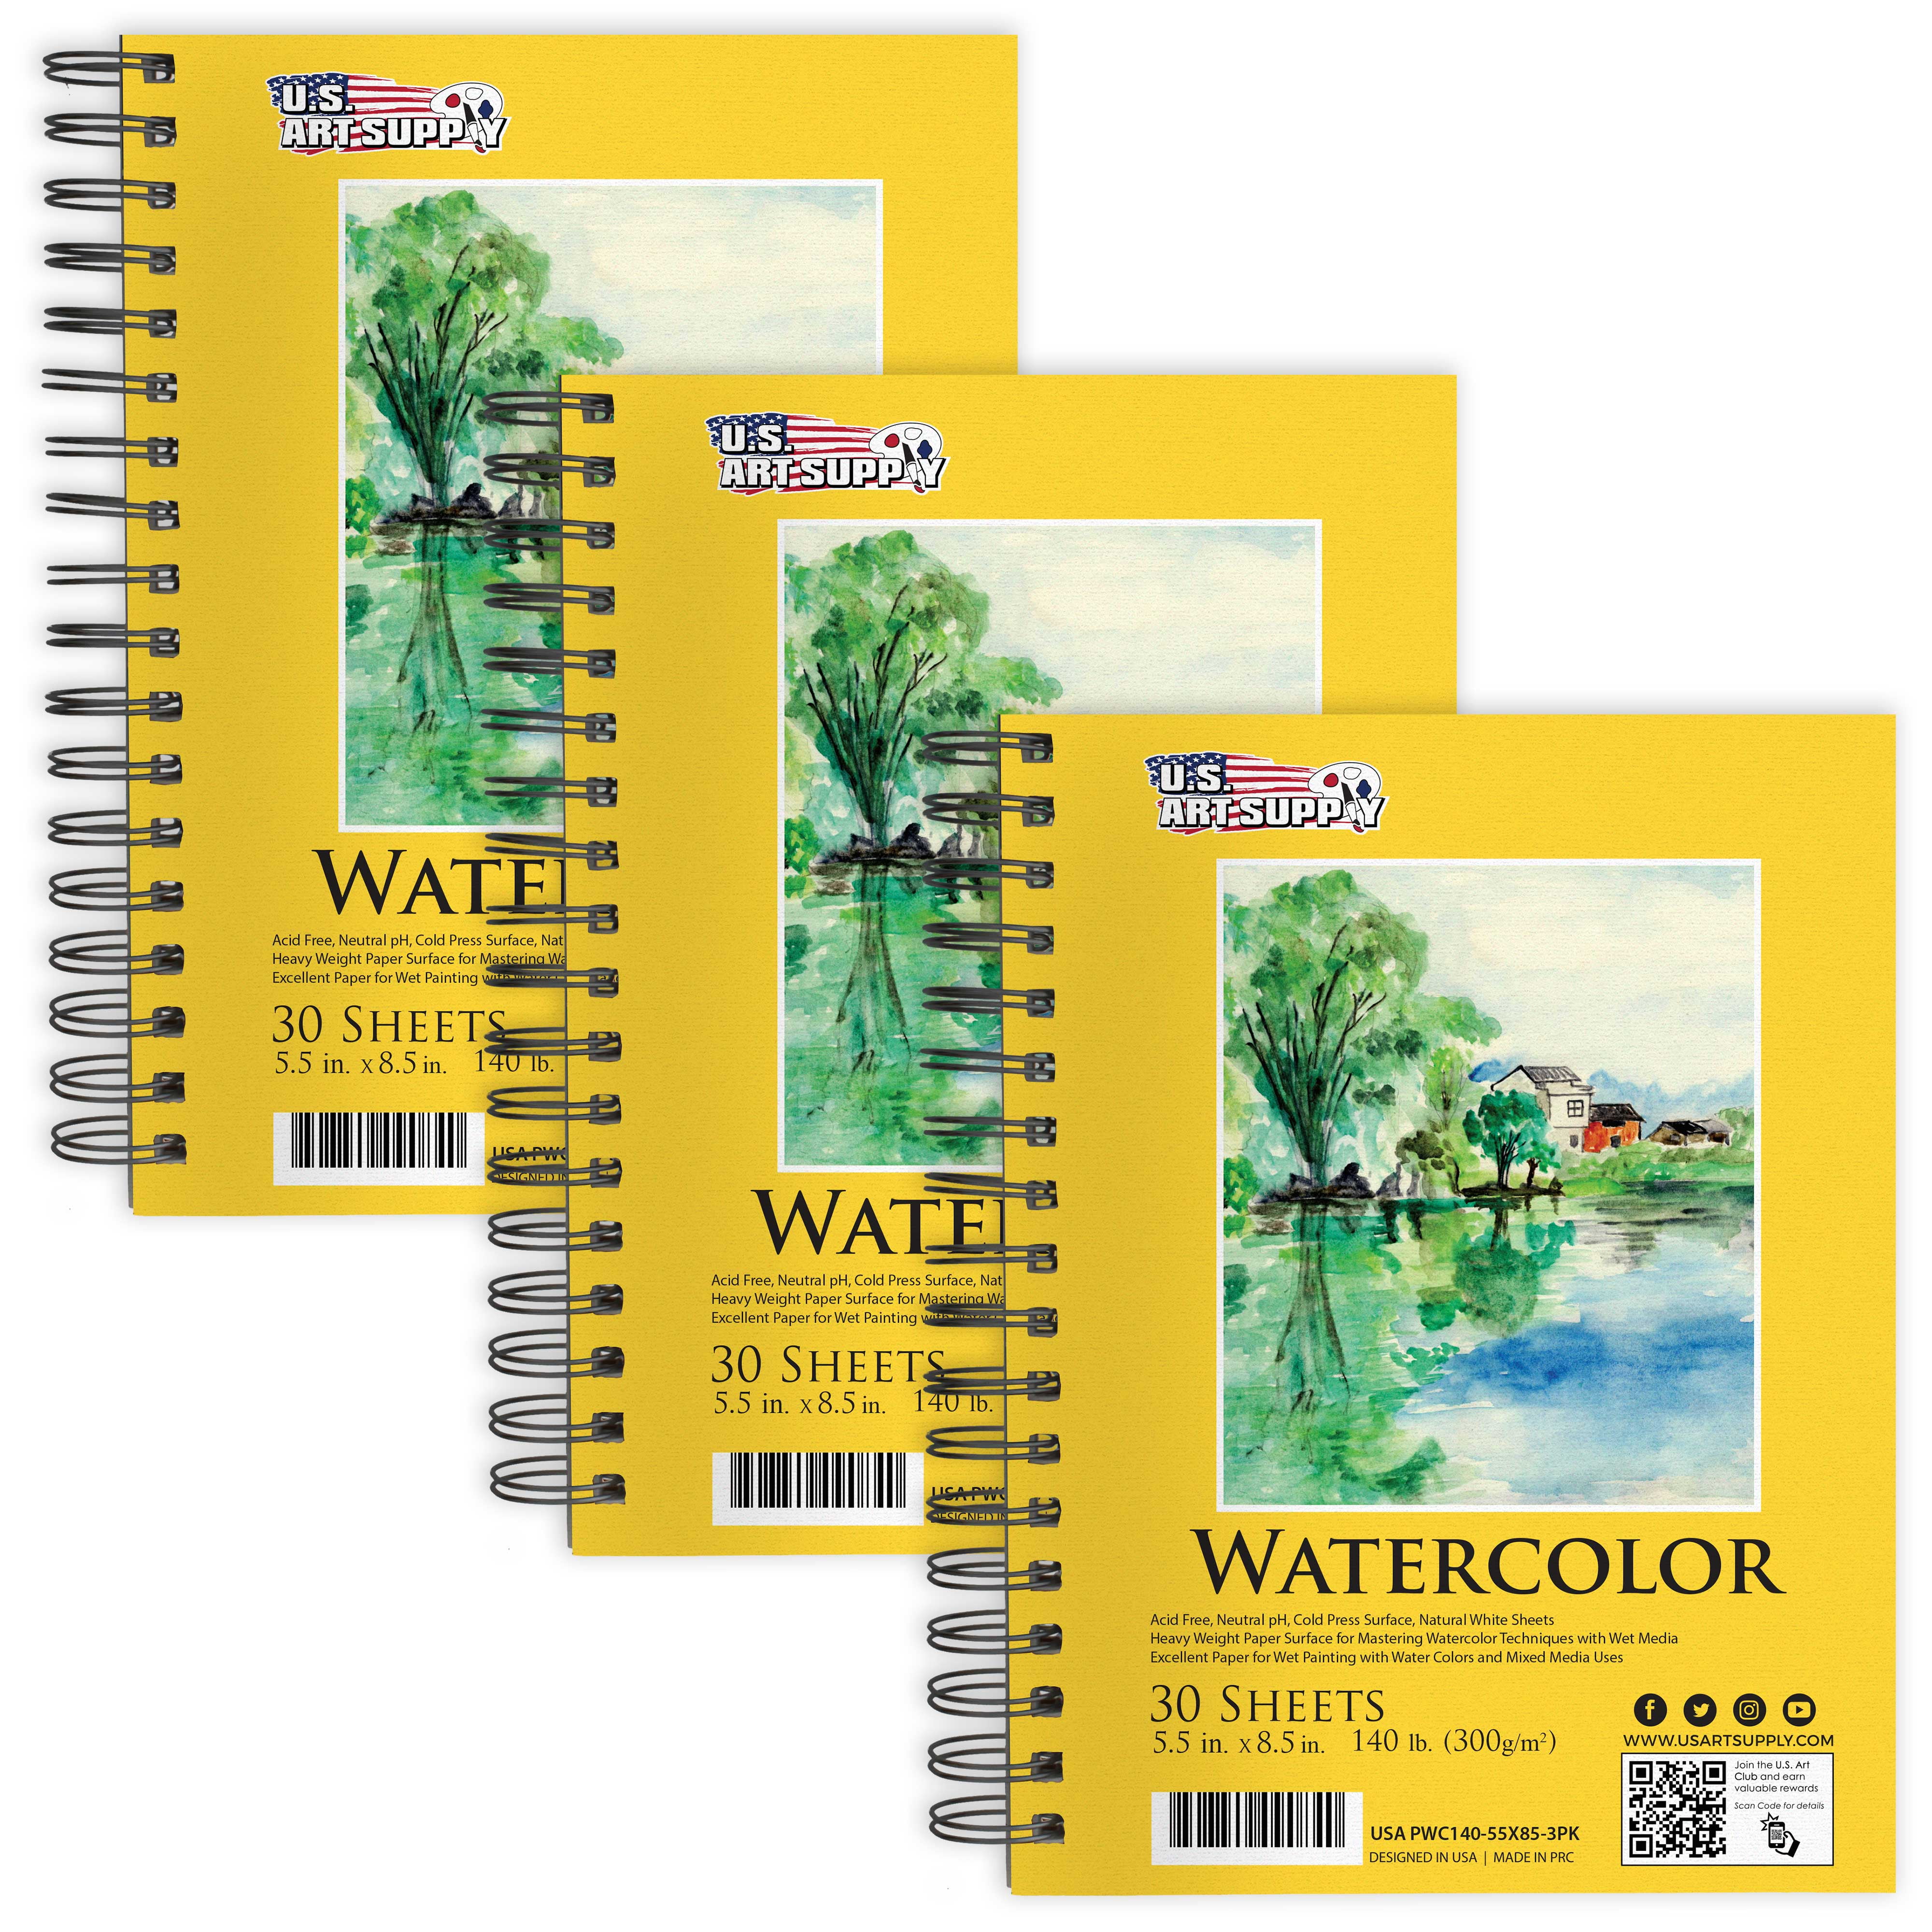 U.S. Art Supply 5.5 x 8.5 Premium Heavyweight Watercolor Painting Paper  Pad, Pack of 3, 30 Sheets Each, 140lb (300gsm) - Spiral Bound, Cold  Pressed, Acid-Free, Wet, Mixed Media - Artists, Students 